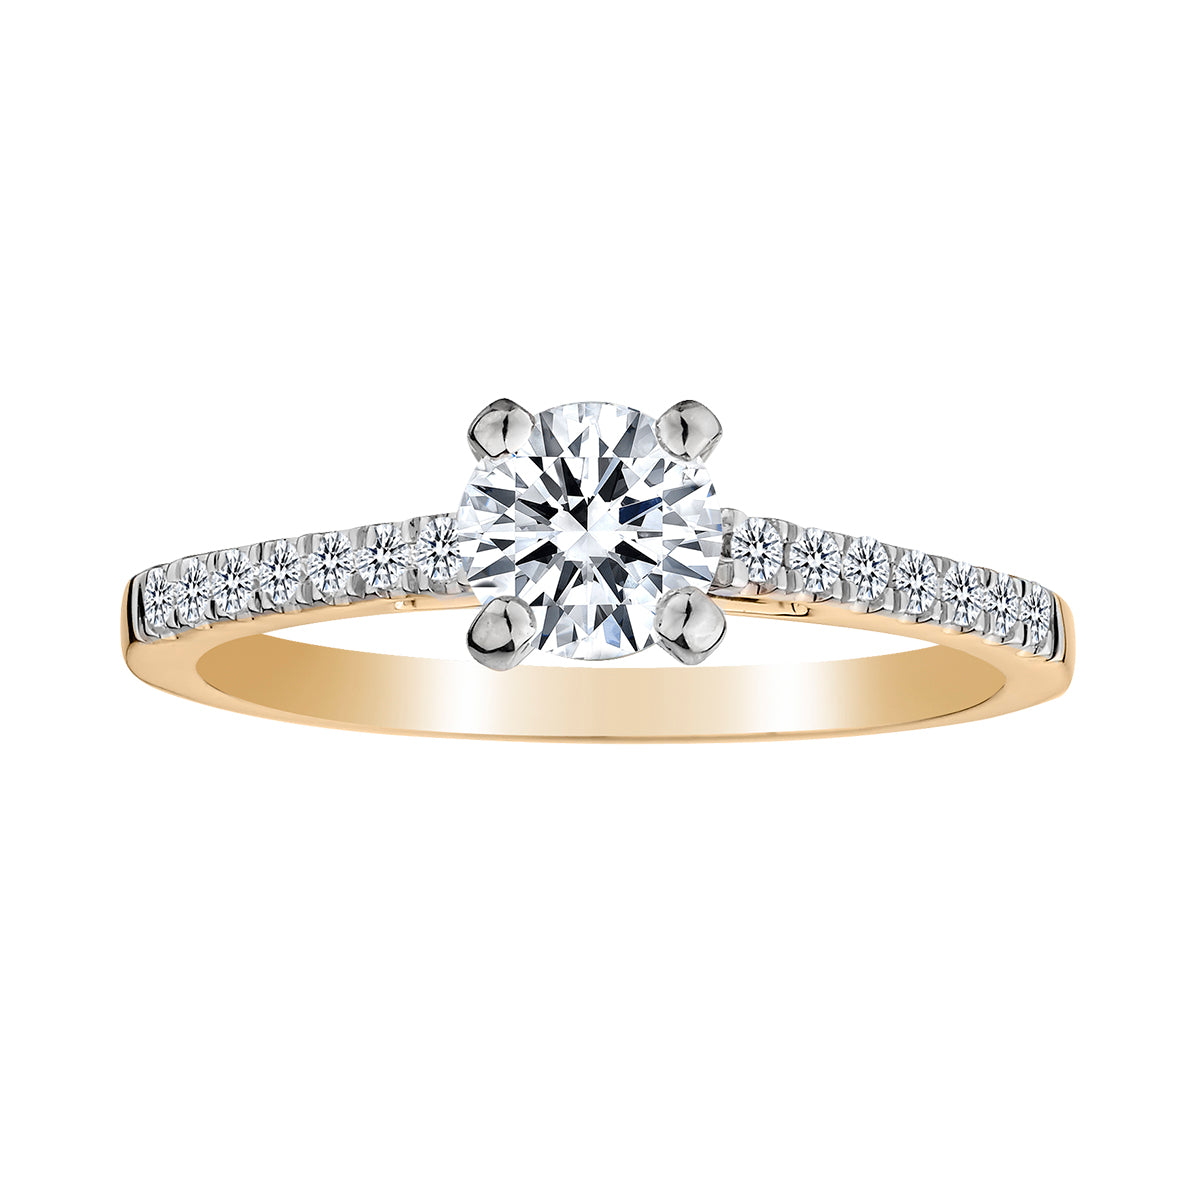 .87 Carat Total Diamond Weight, .70 Carat Centre Diamond Engagement Ring,  14kt Yellow Gold (Two Tone). Griffin Jewellery Designs